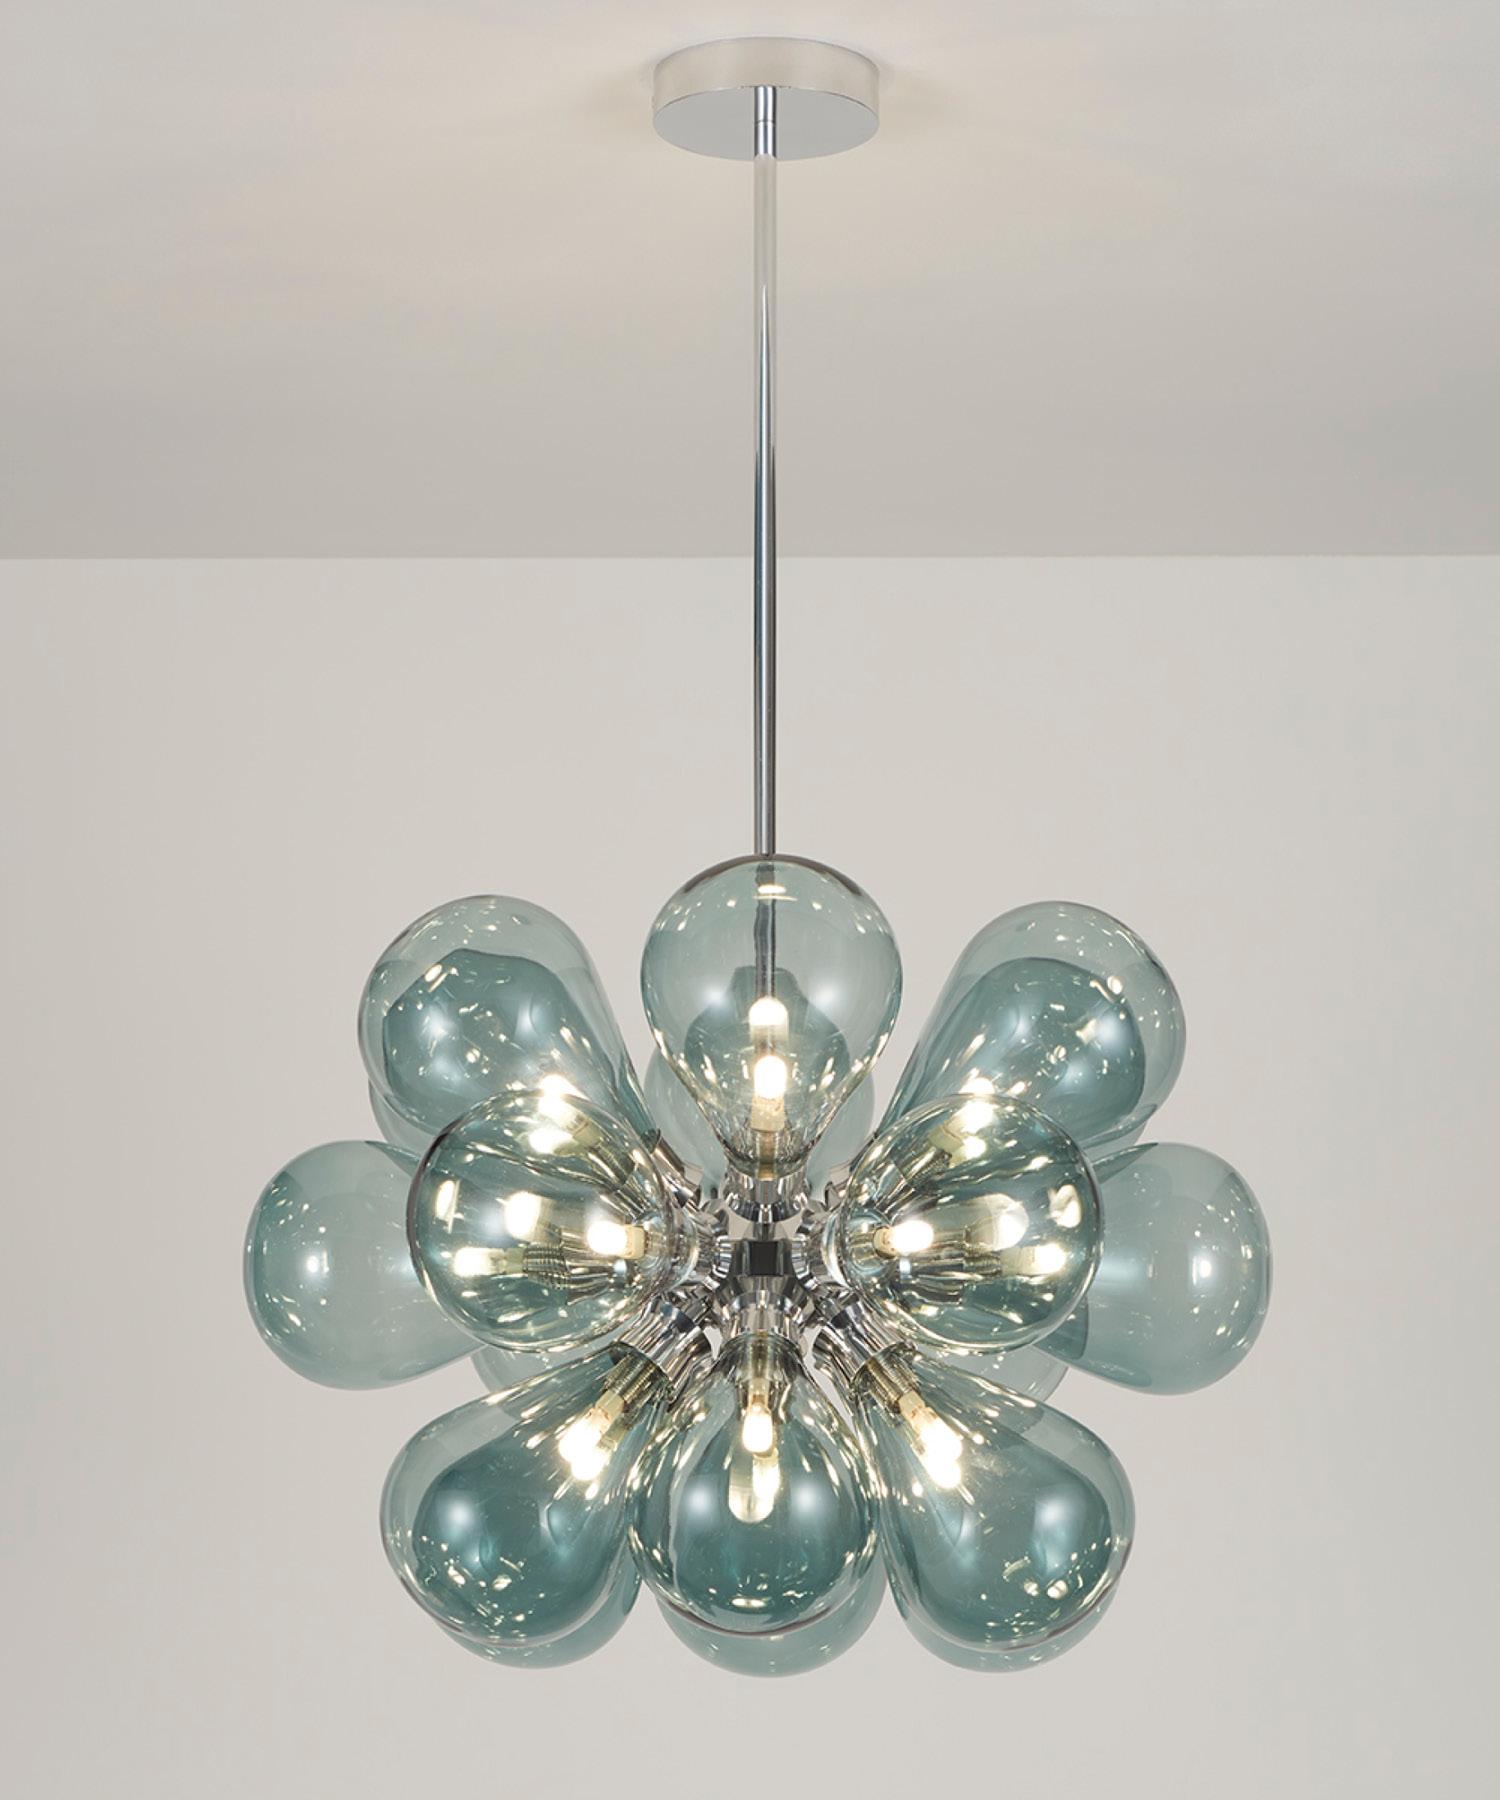 Cintola Maxi Pendant in Satin Gold with 18 Handblown Smoke Grey Glass Globes In New Condition For Sale In London, GB